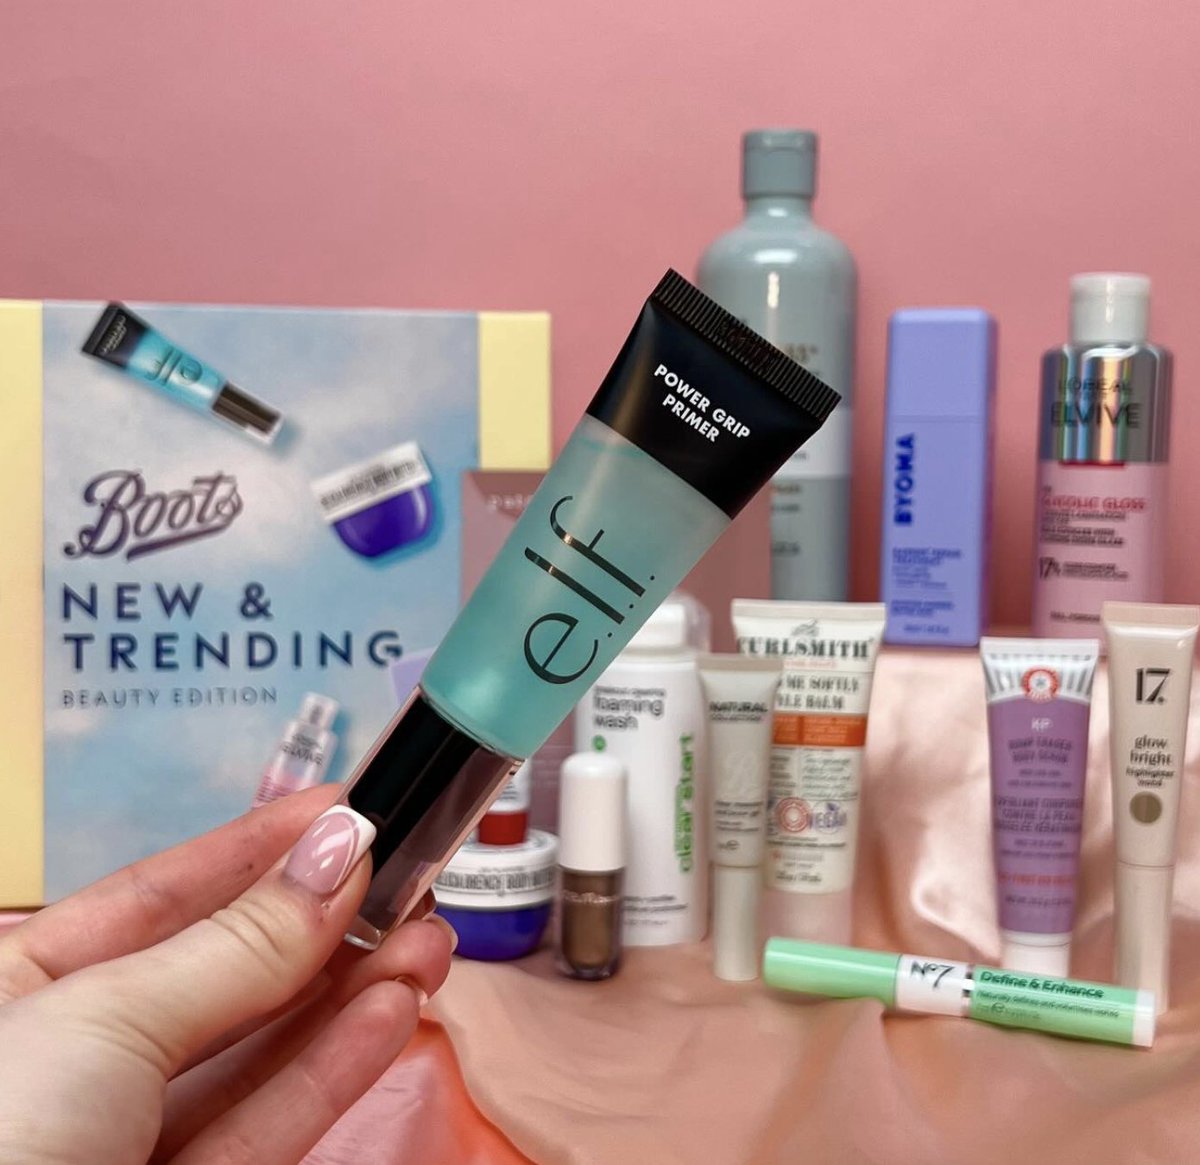 🚨Trending on social 🚨 @boots New and Trending Beauty Box is your one-stop shop for discovering viral, must-have makeup, skincare and haircare,